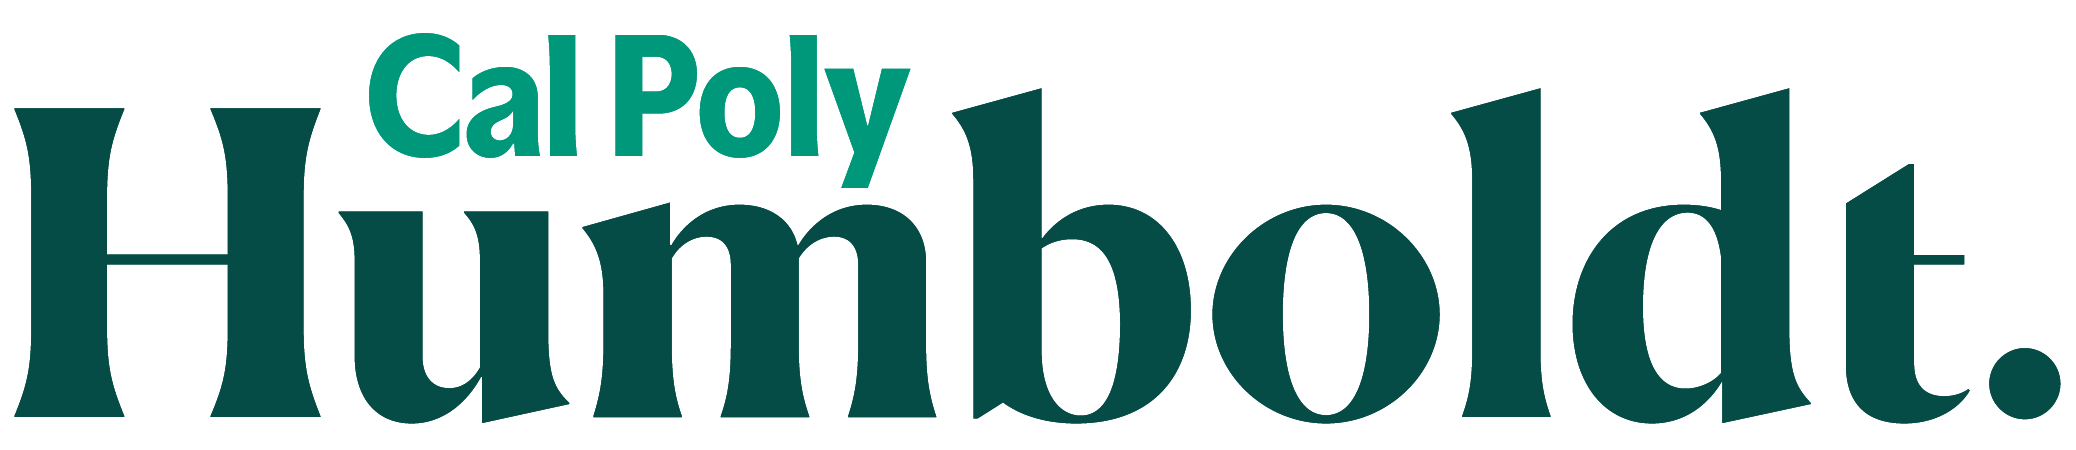 institutions-Cal Poly Humboldt logo20230110151442.png